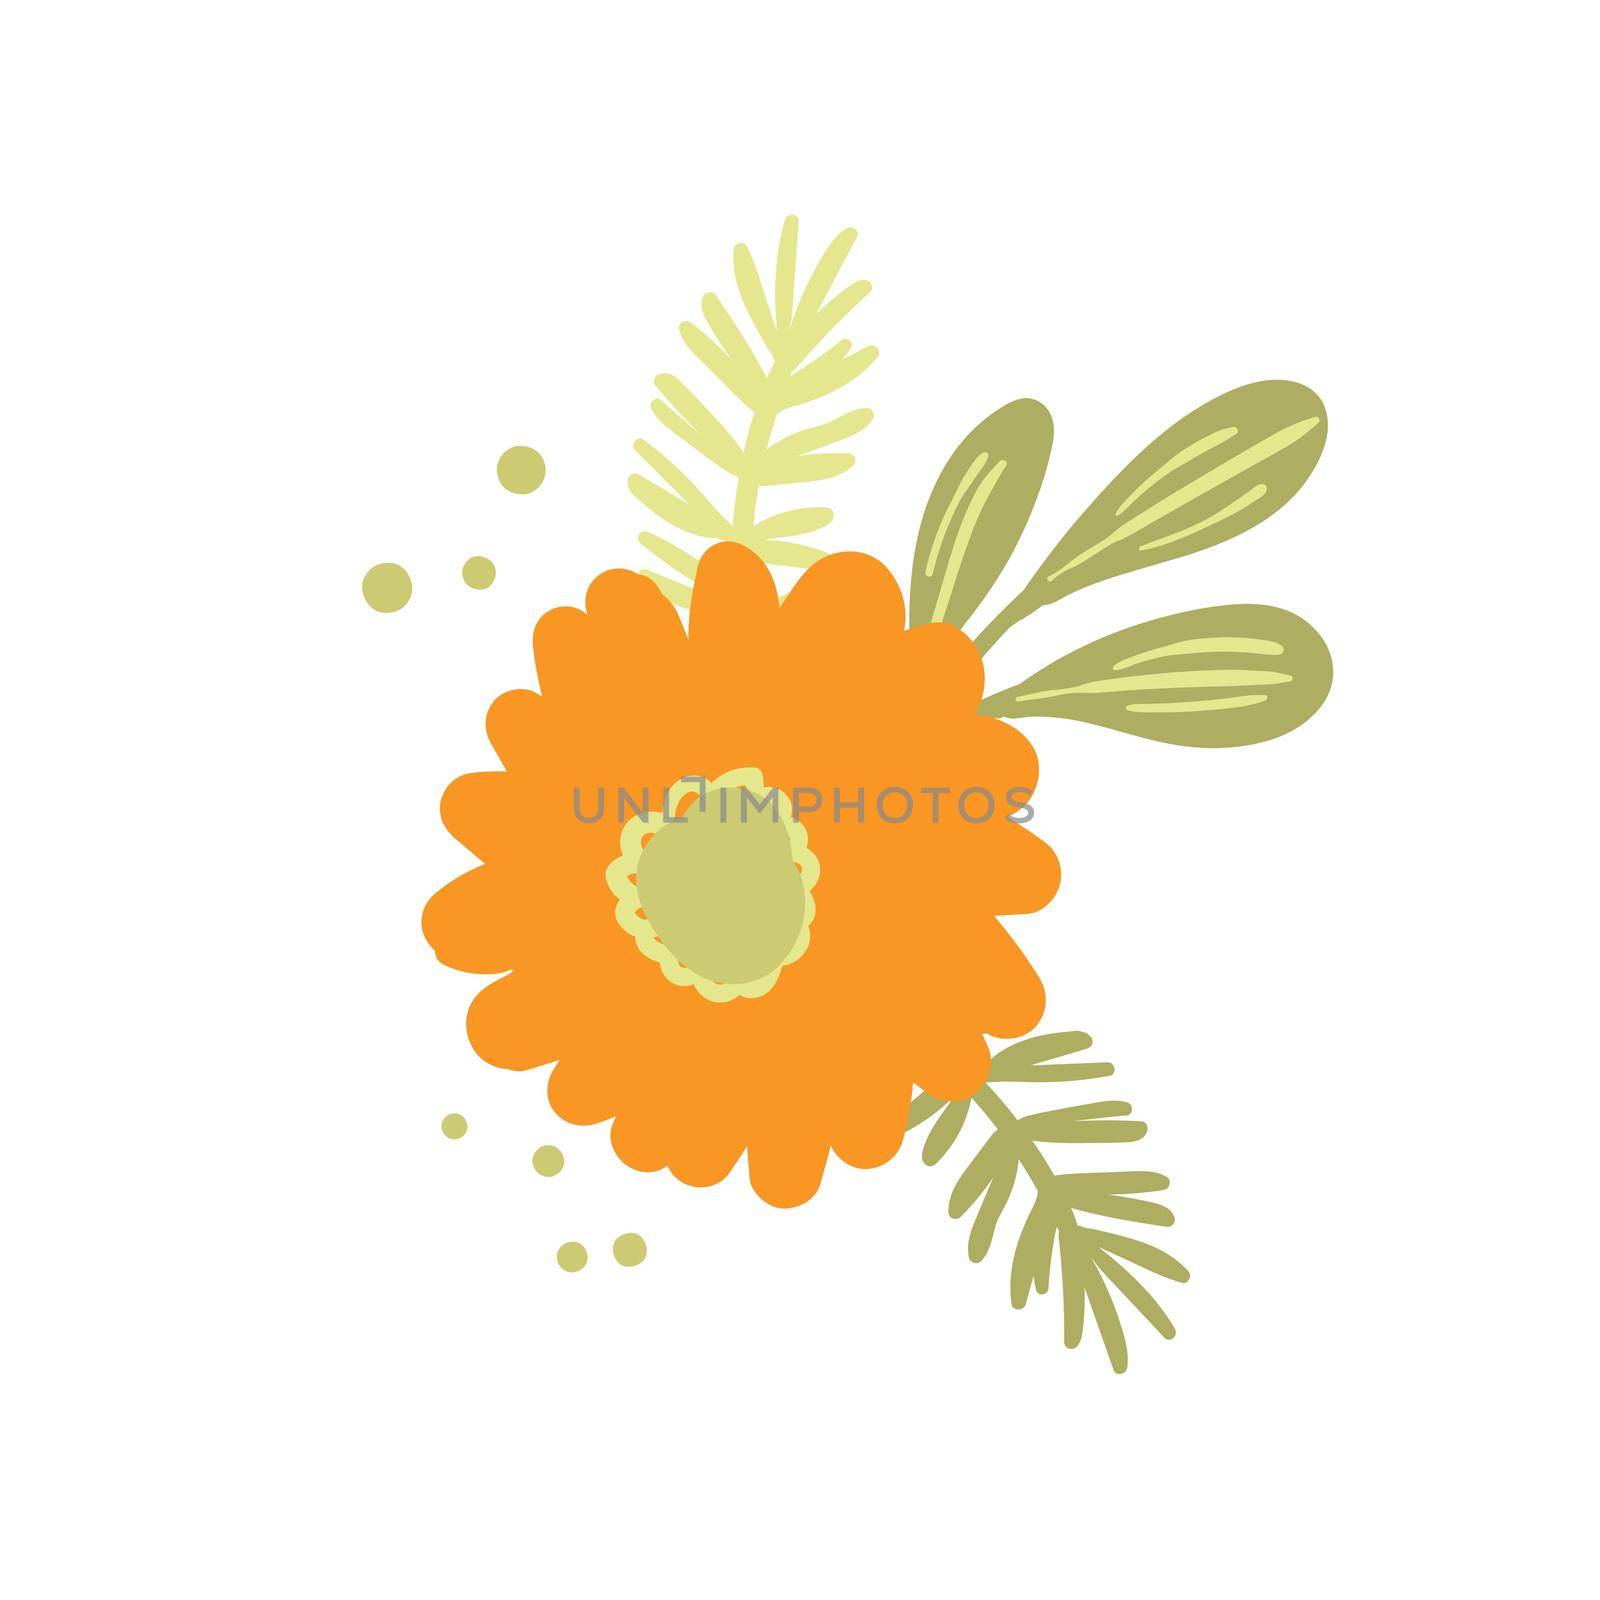 Floral set based on traditional folk art ornaments. Isolated orange and green flowers. Scandinavian style. Sweden nordic style. Vector illustration. Simple minimalistic nature element by allaku